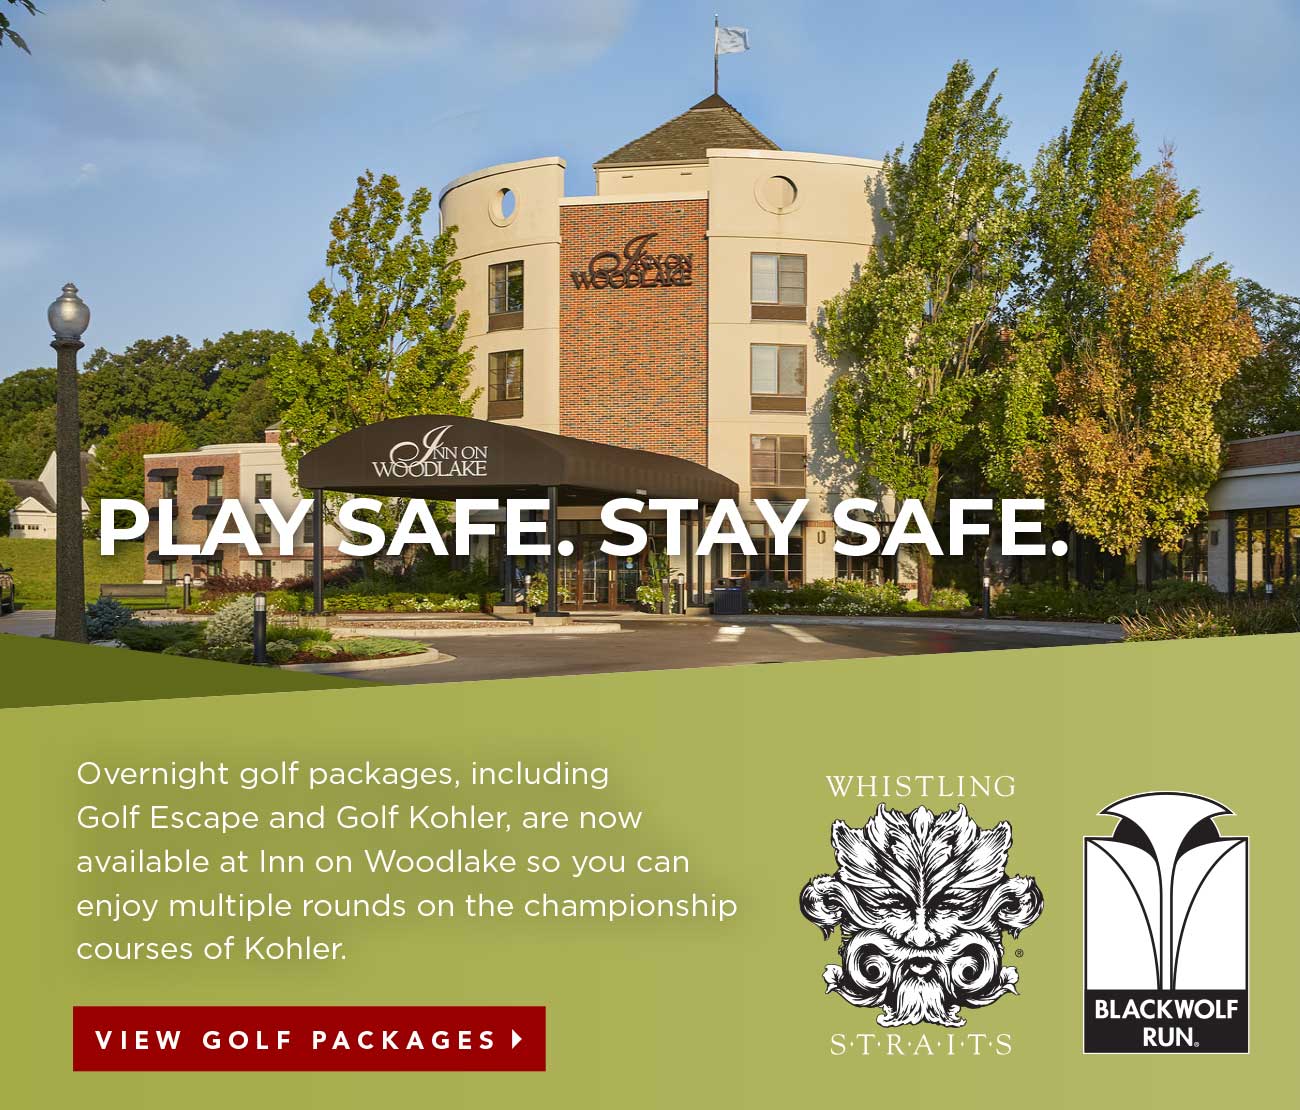 PLAY SAFE. STAY SAFE. | Overnight golf packages, including Golf Escape and Golf Kohler, are now available at Inn on Woodlake so you can enjoy multiple rounds on the championship courses of Kohler. | RYDER CUP 2020 | WHISTLING STRAITS® | View golf packages